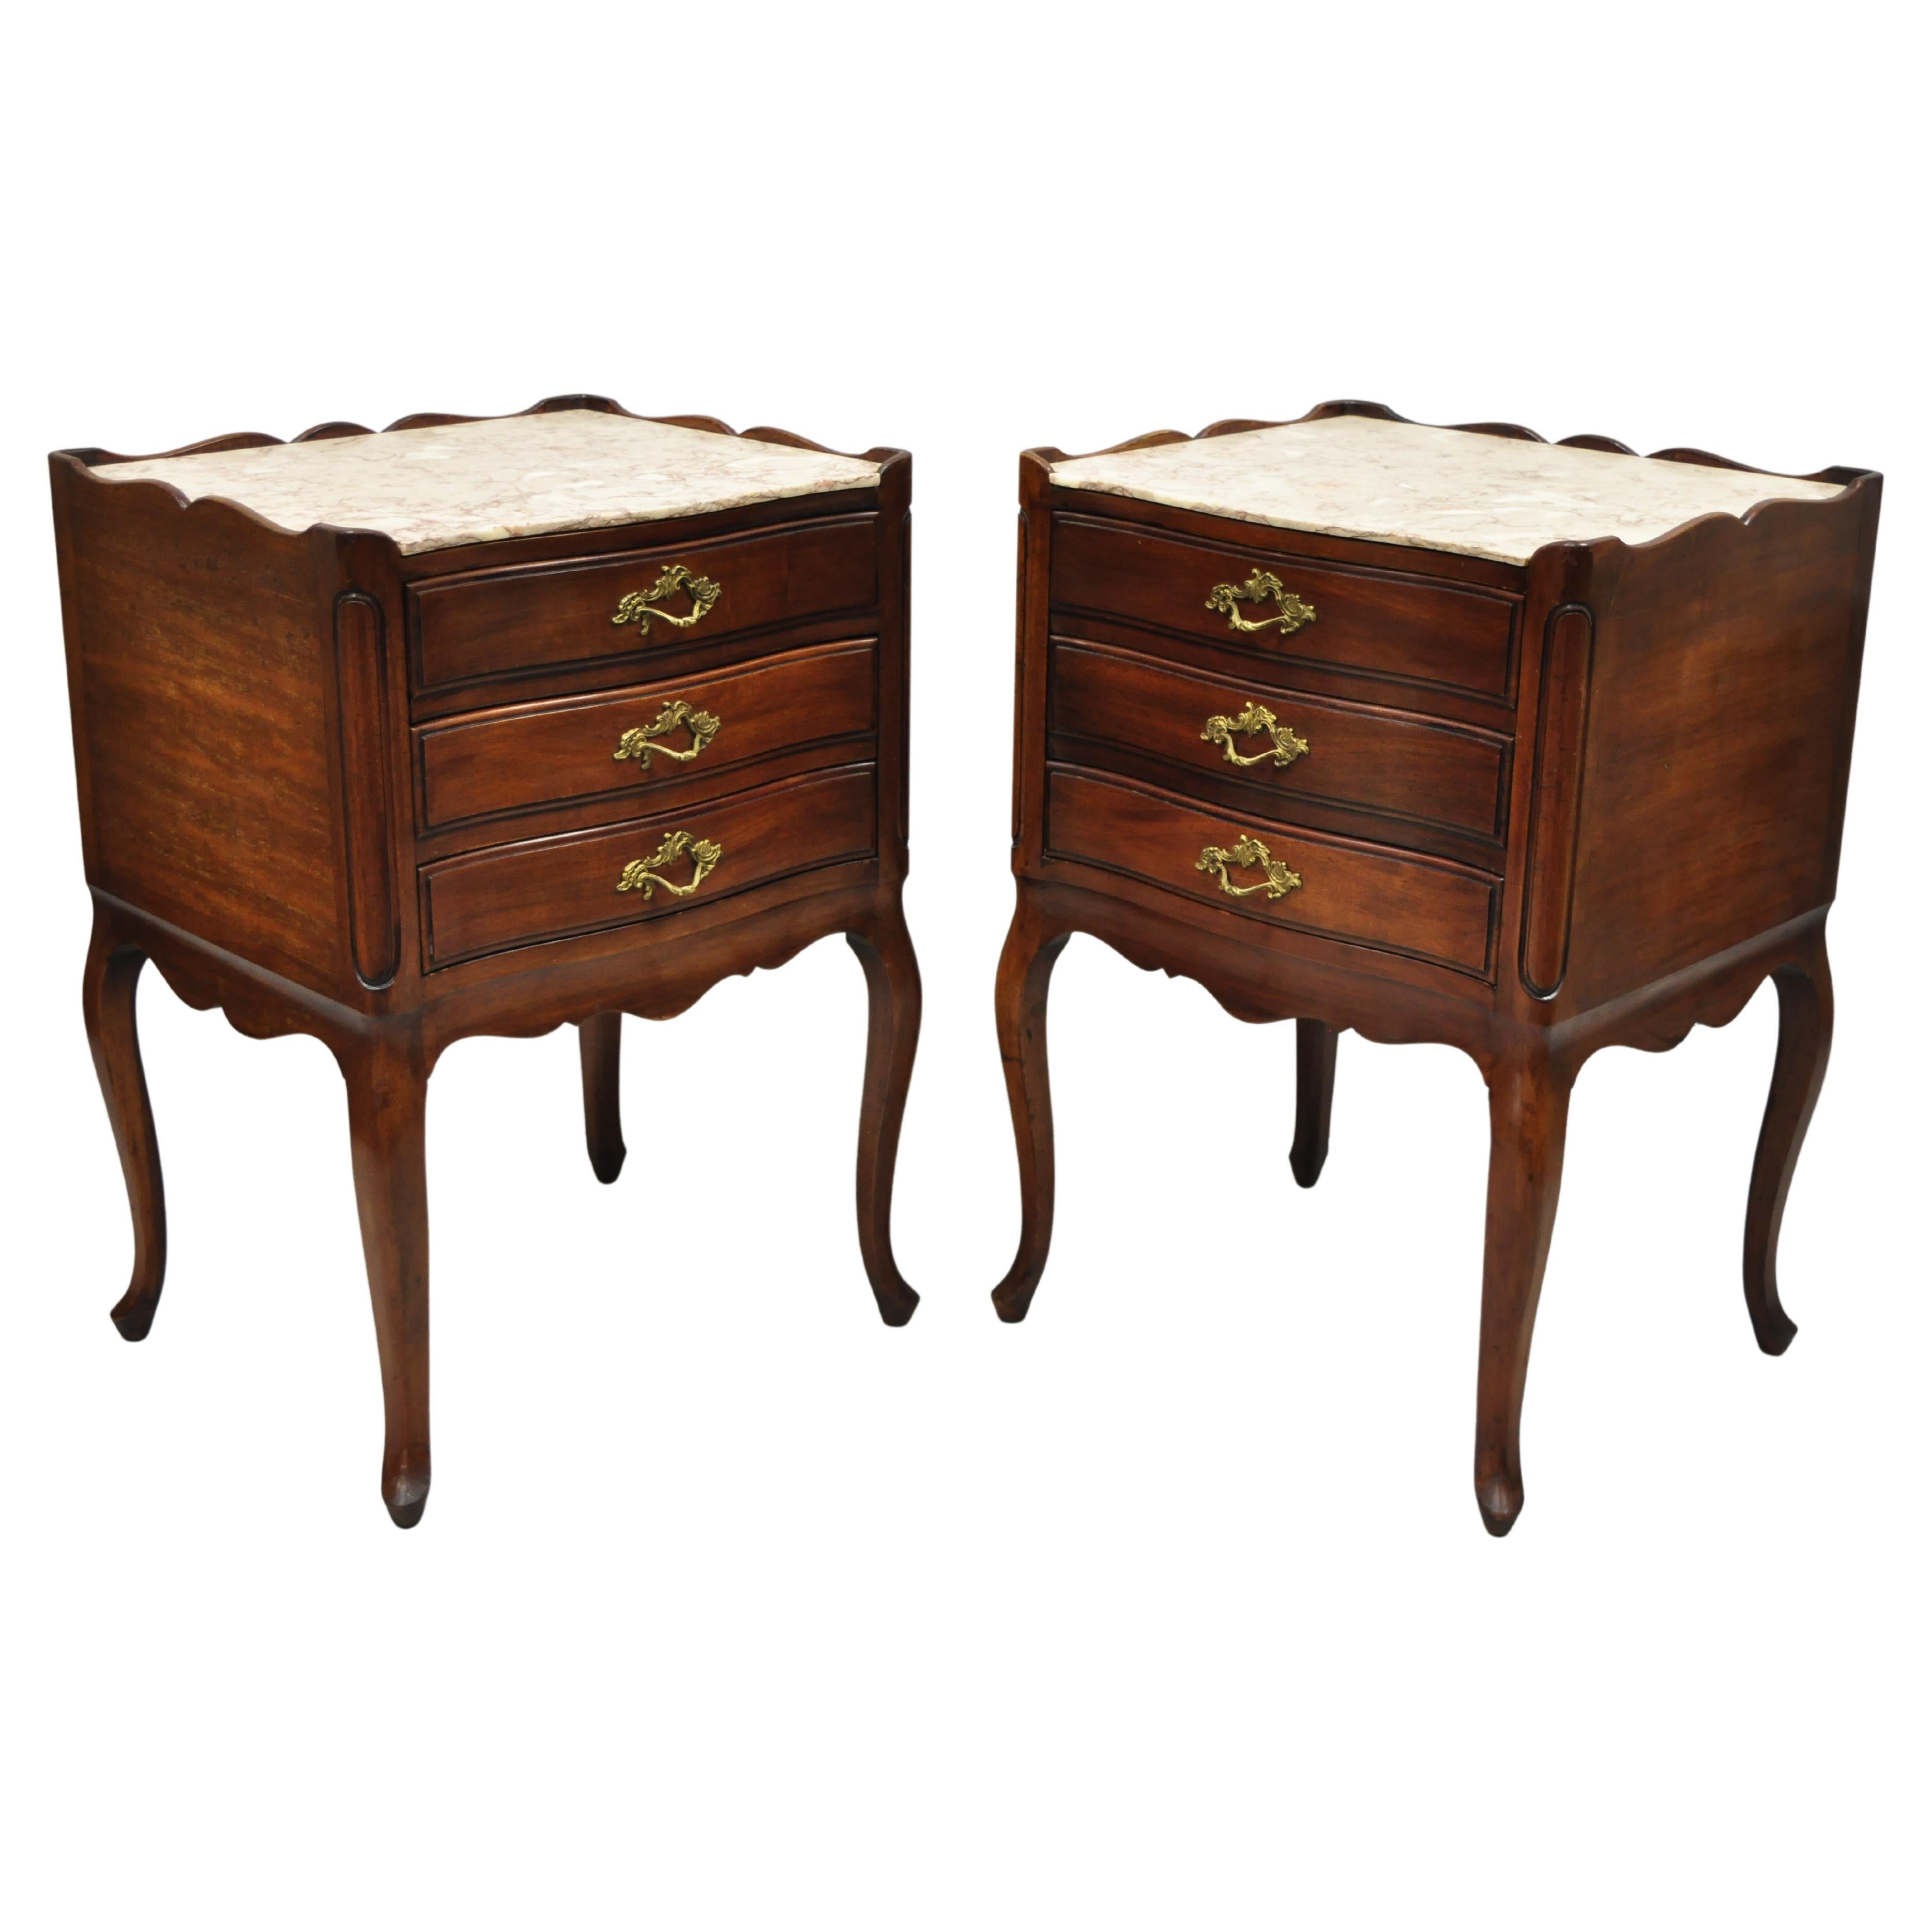 John Widdicomb French Provincial Cherry Wood Pink Marble Top Nightstand, a Pair